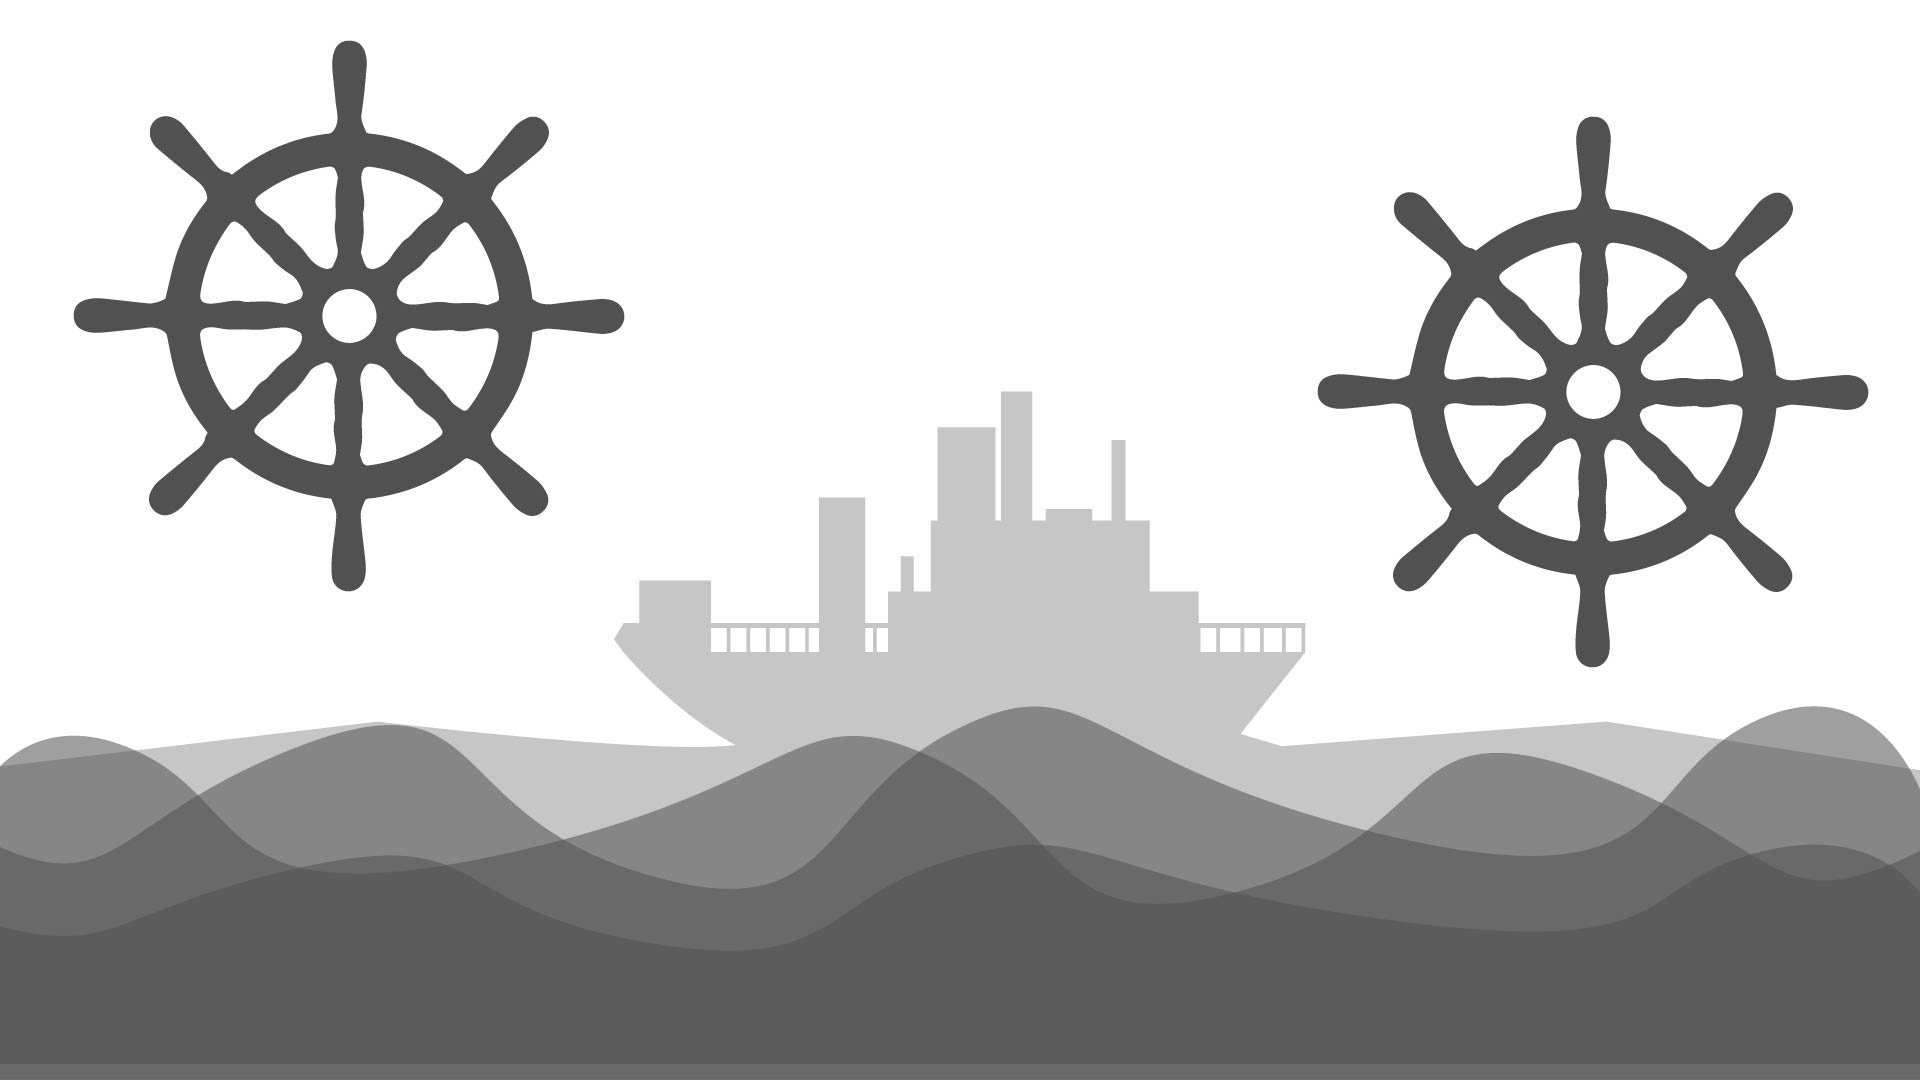 Free National Maritime Day Drawing Background in PDF, Illustrator, PSD, EPS, SVG, JPG, PNG